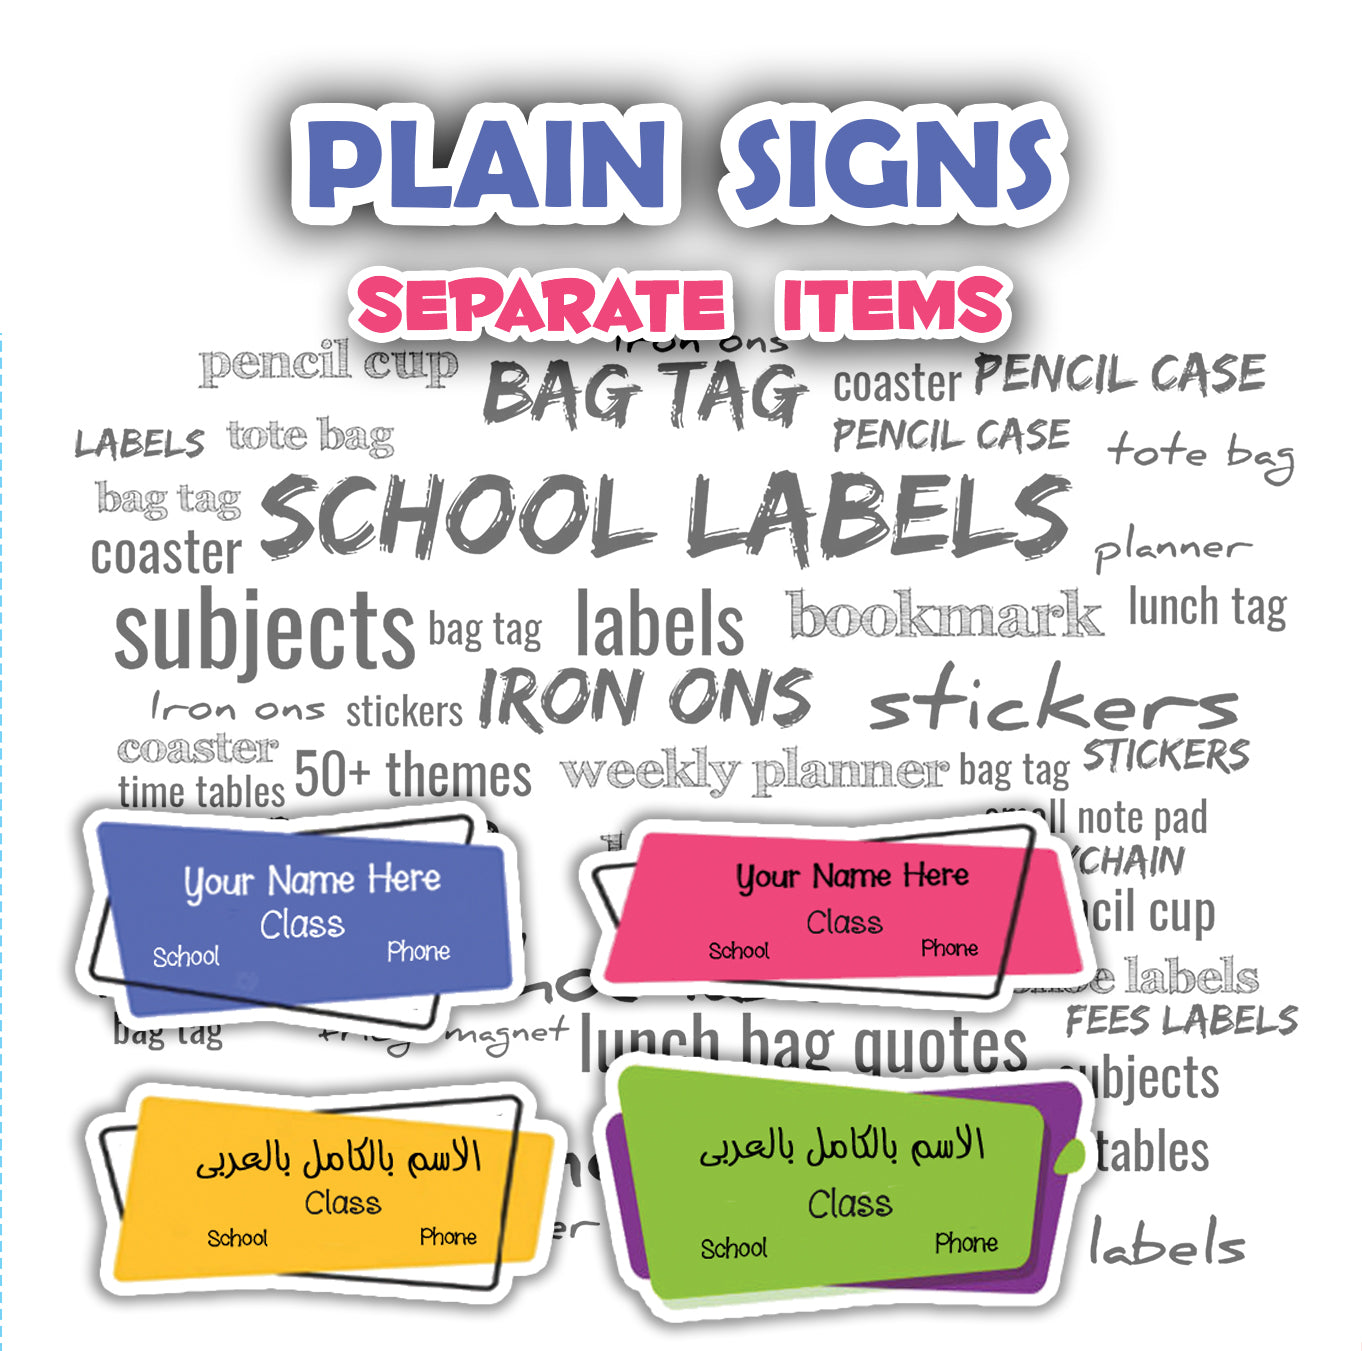 ""Plain Signs" Separate items